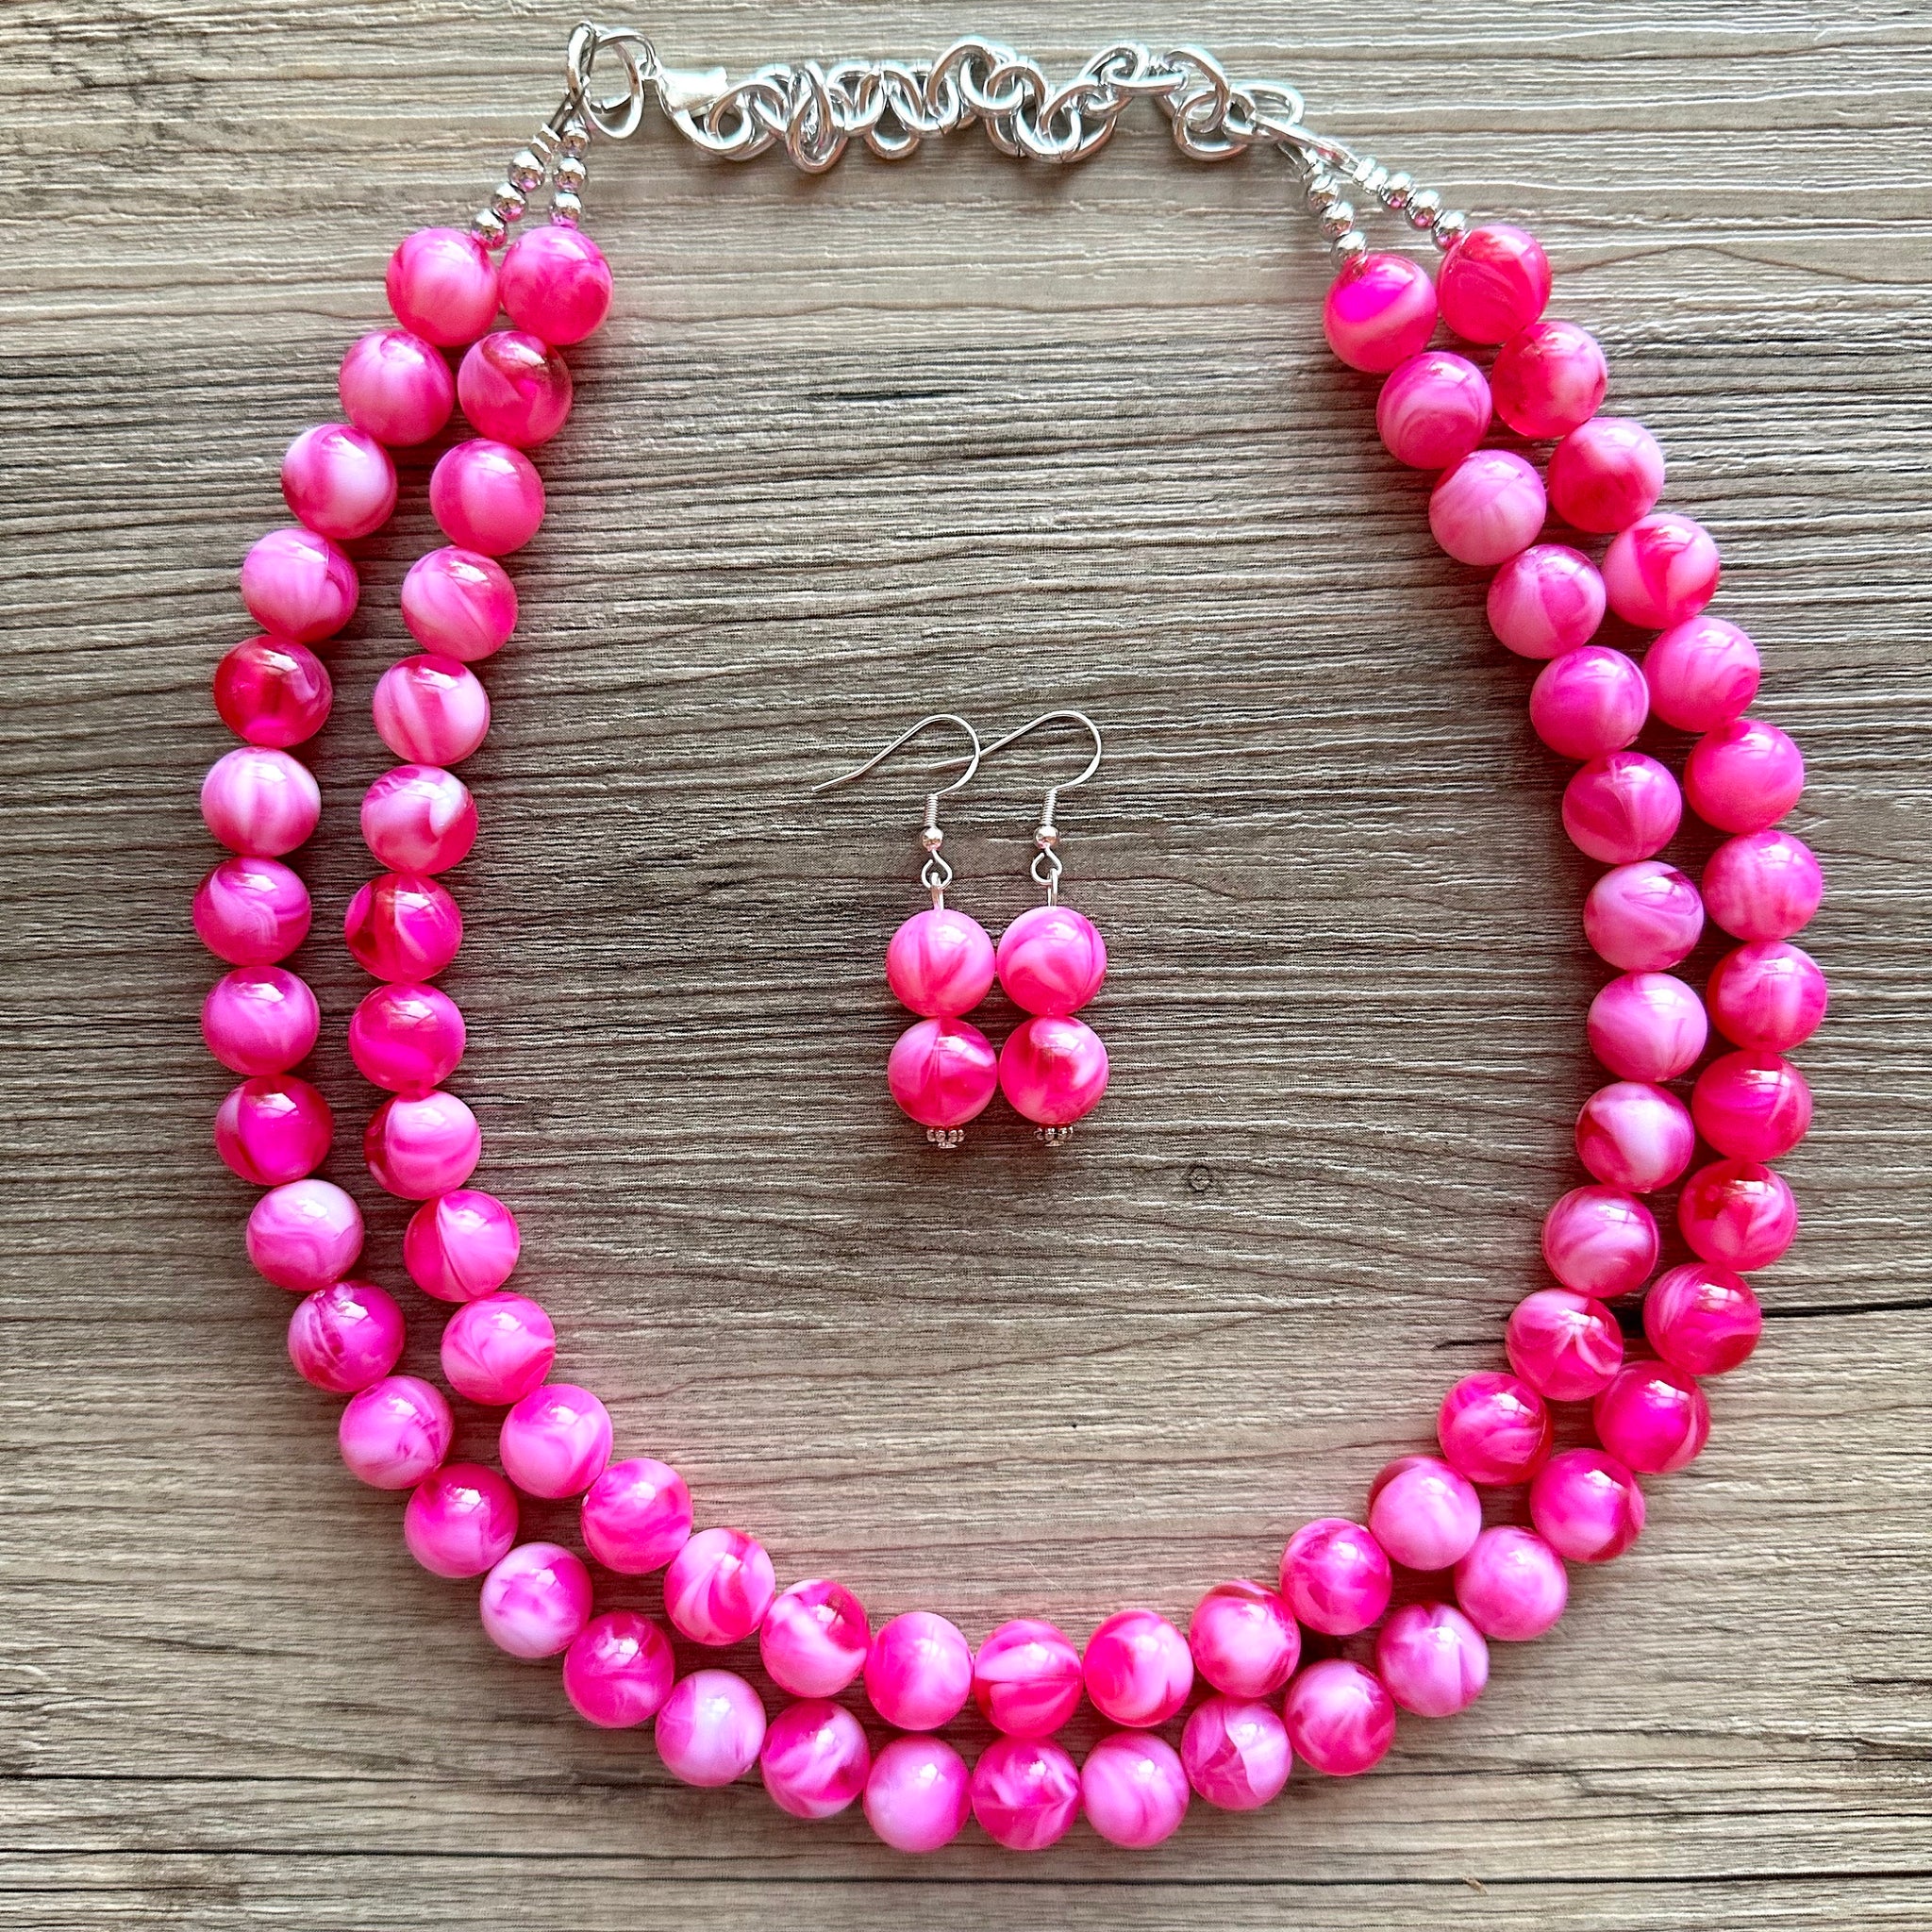 VINTAGE CHUNKY FUCHSIA PINK 3 STRANDED BEADS STATEMENT Necklace